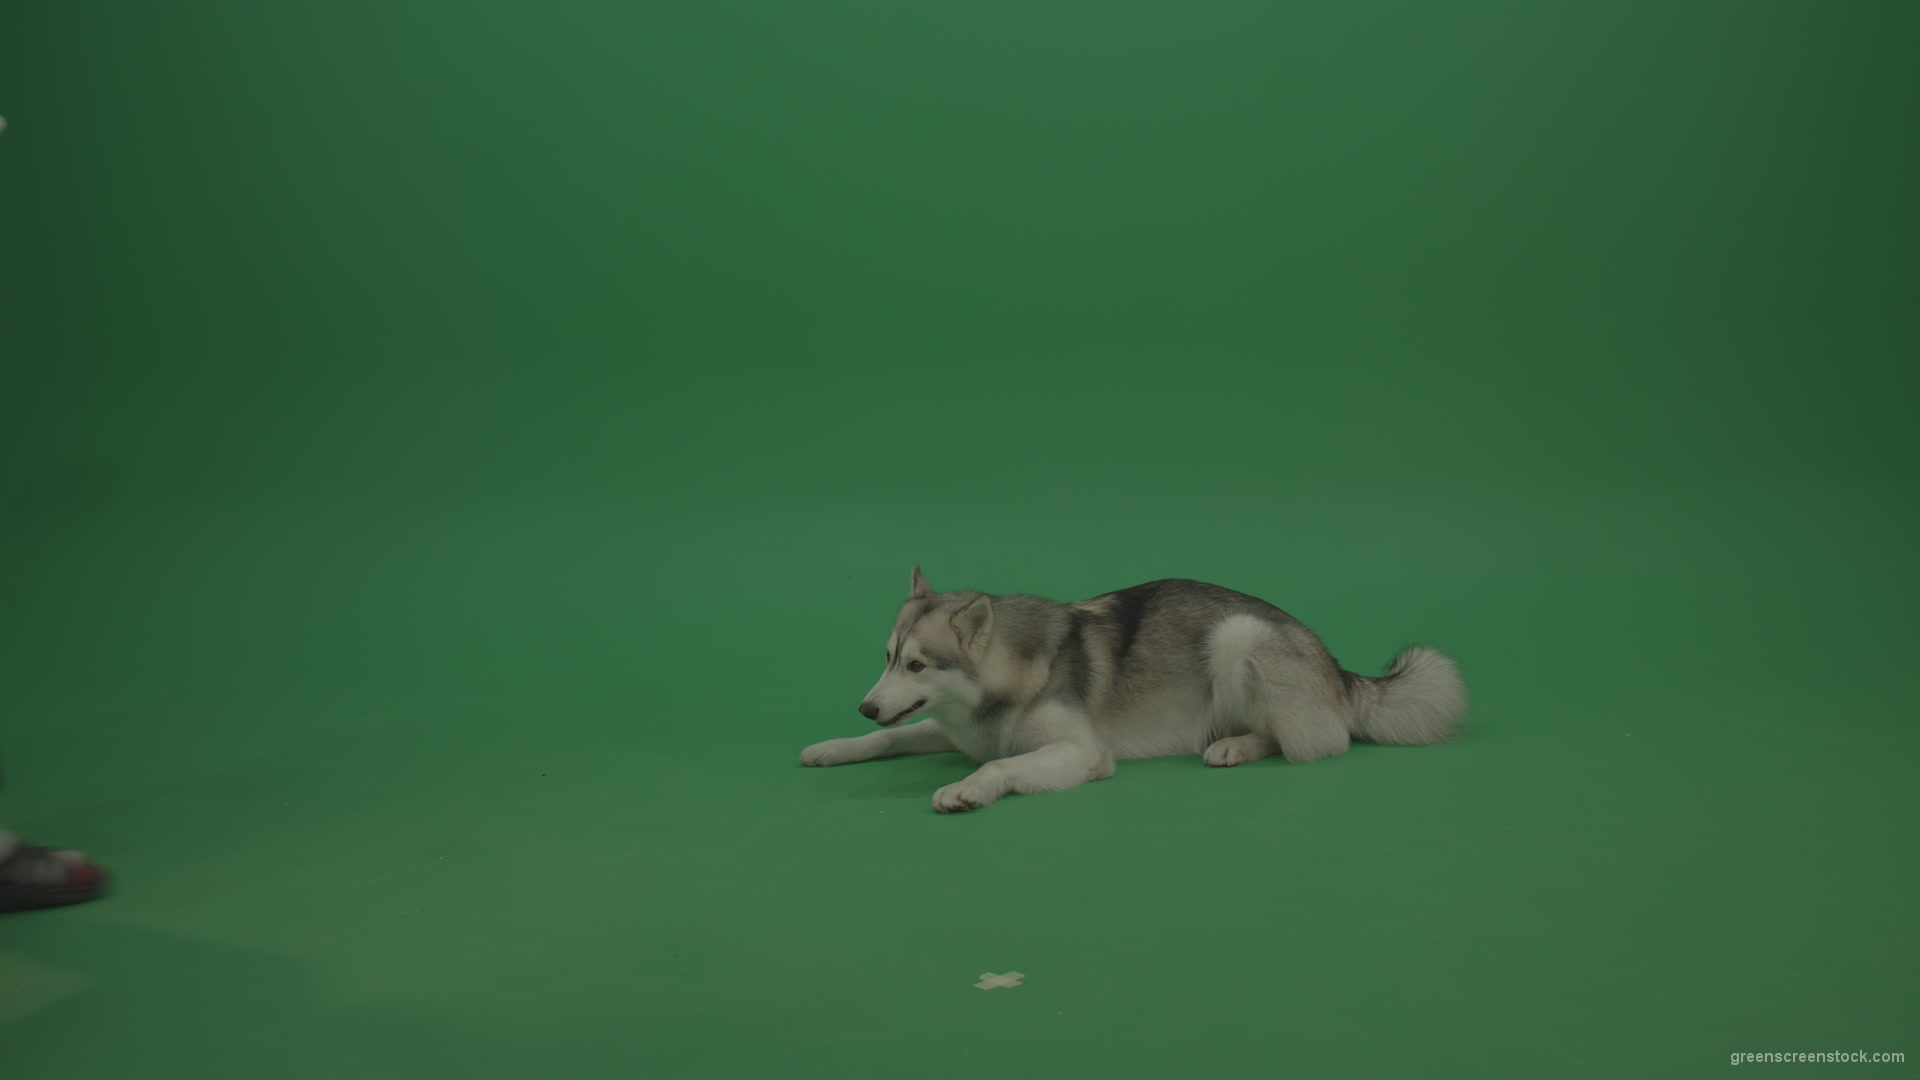 Grey_White_Huskie_Dog_Lying_On_The_Ground_Chewing_Coockie_Stands_Up_And_Walks_Away_Green_Screen_Wall_Background_001 Green Screen Stock